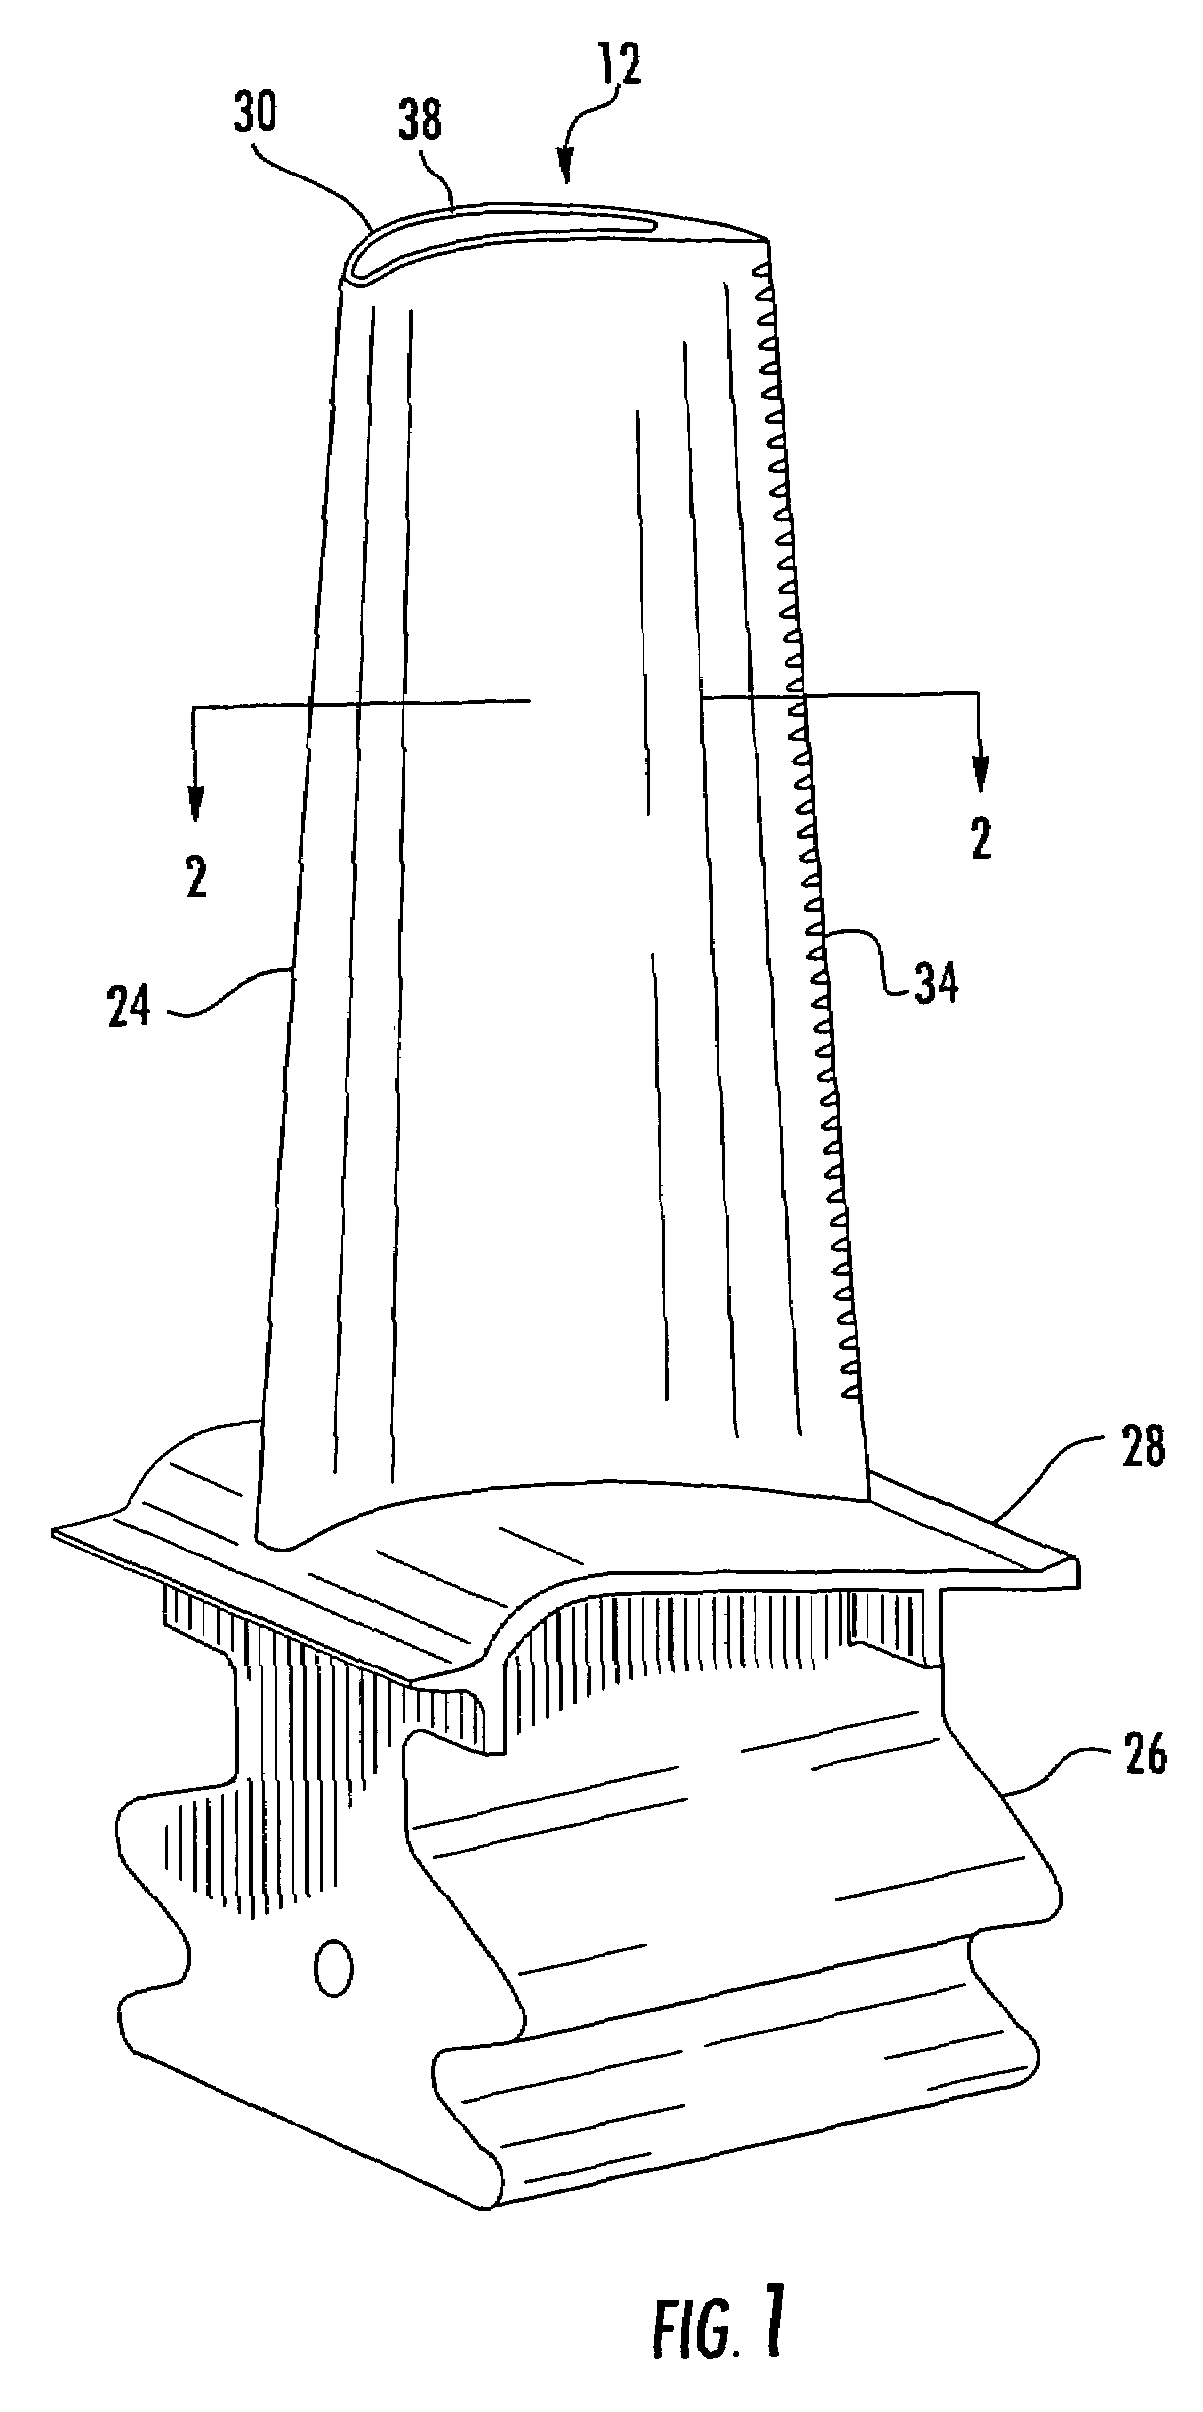 Turbine airfoil cooling system with axial flowing serpentine cooling chambers